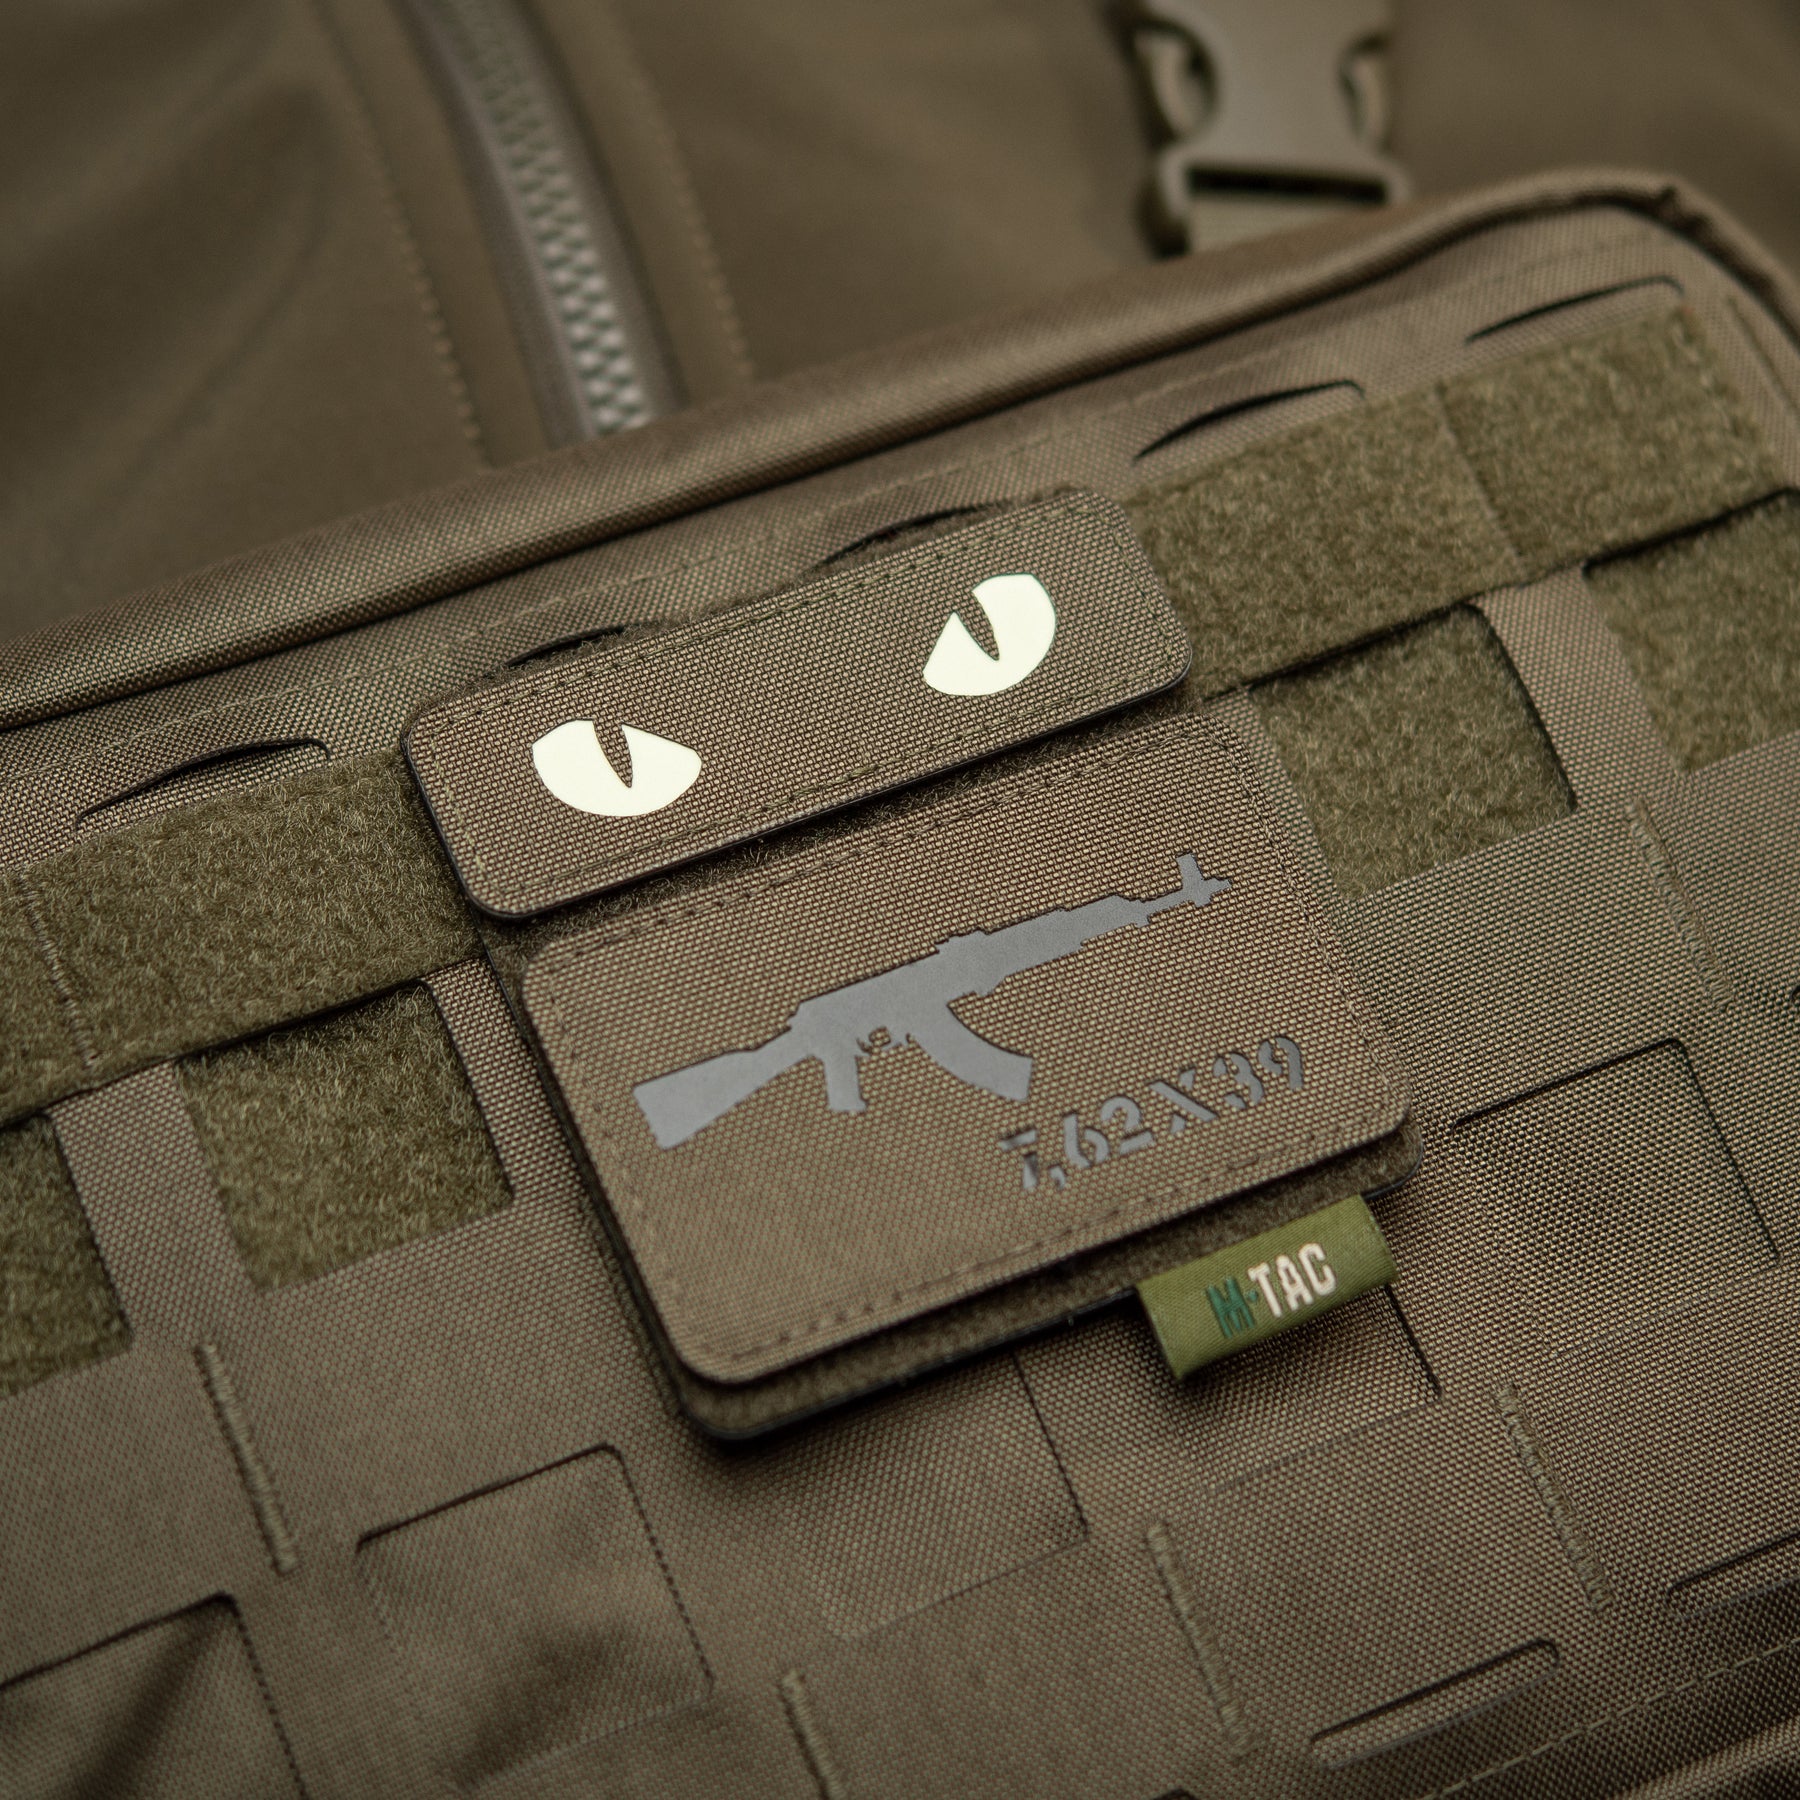 ROCOTACTICAL Hook and Loop Tactical Patches Board Molle Attachment, Patches Display Board Tactical Molle Hook and Loop Molle Panel for Badges and